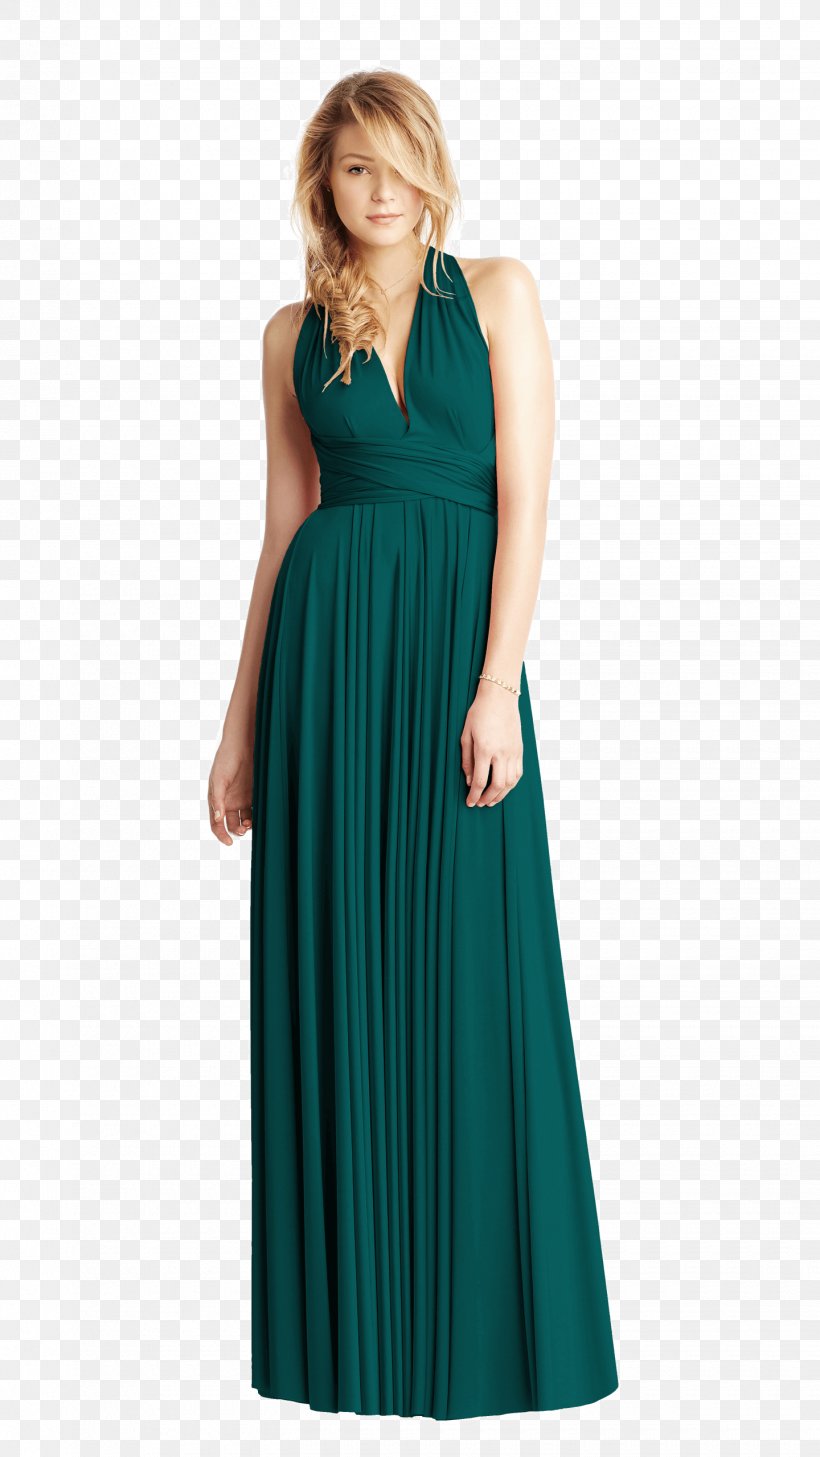 Gown Wedding Dress Formal Wear Bridesmaid, PNG, 1440x2560px, Gown, Aqua, Ball Gown, Bridal Party Dress, Bride Download Free